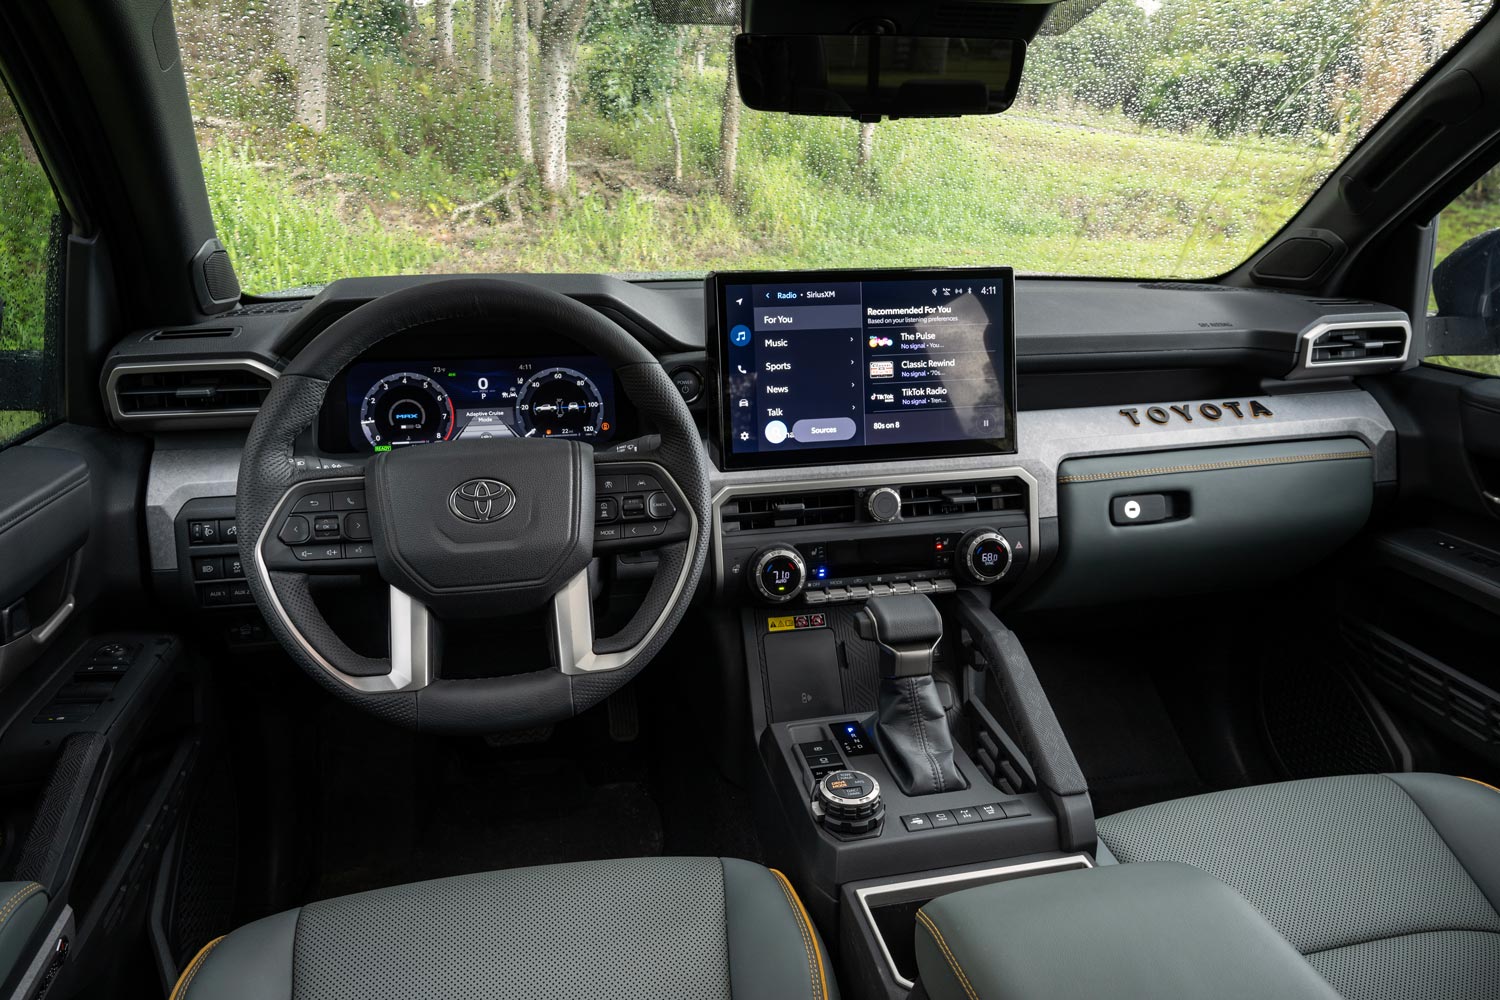 2024 Tacoma Trailhunter interior and infotainment screen